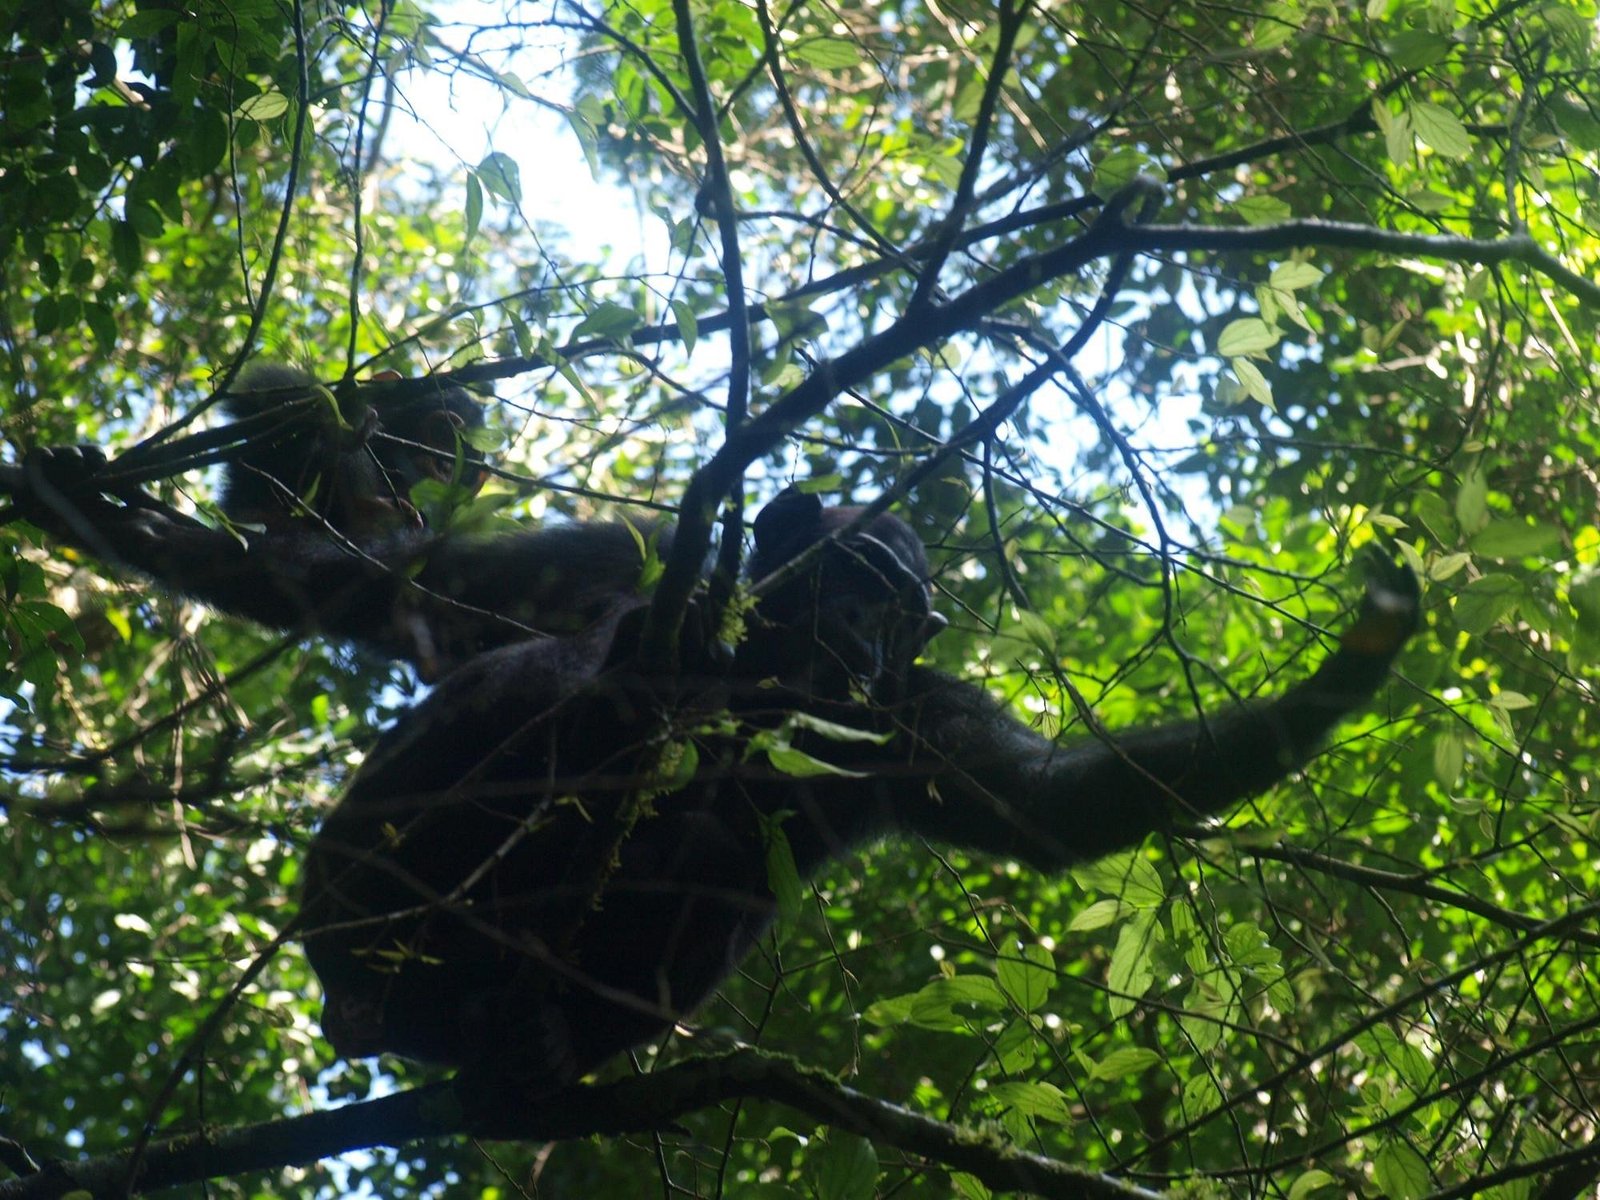 Chimpanzee tracking in Budongo Forest